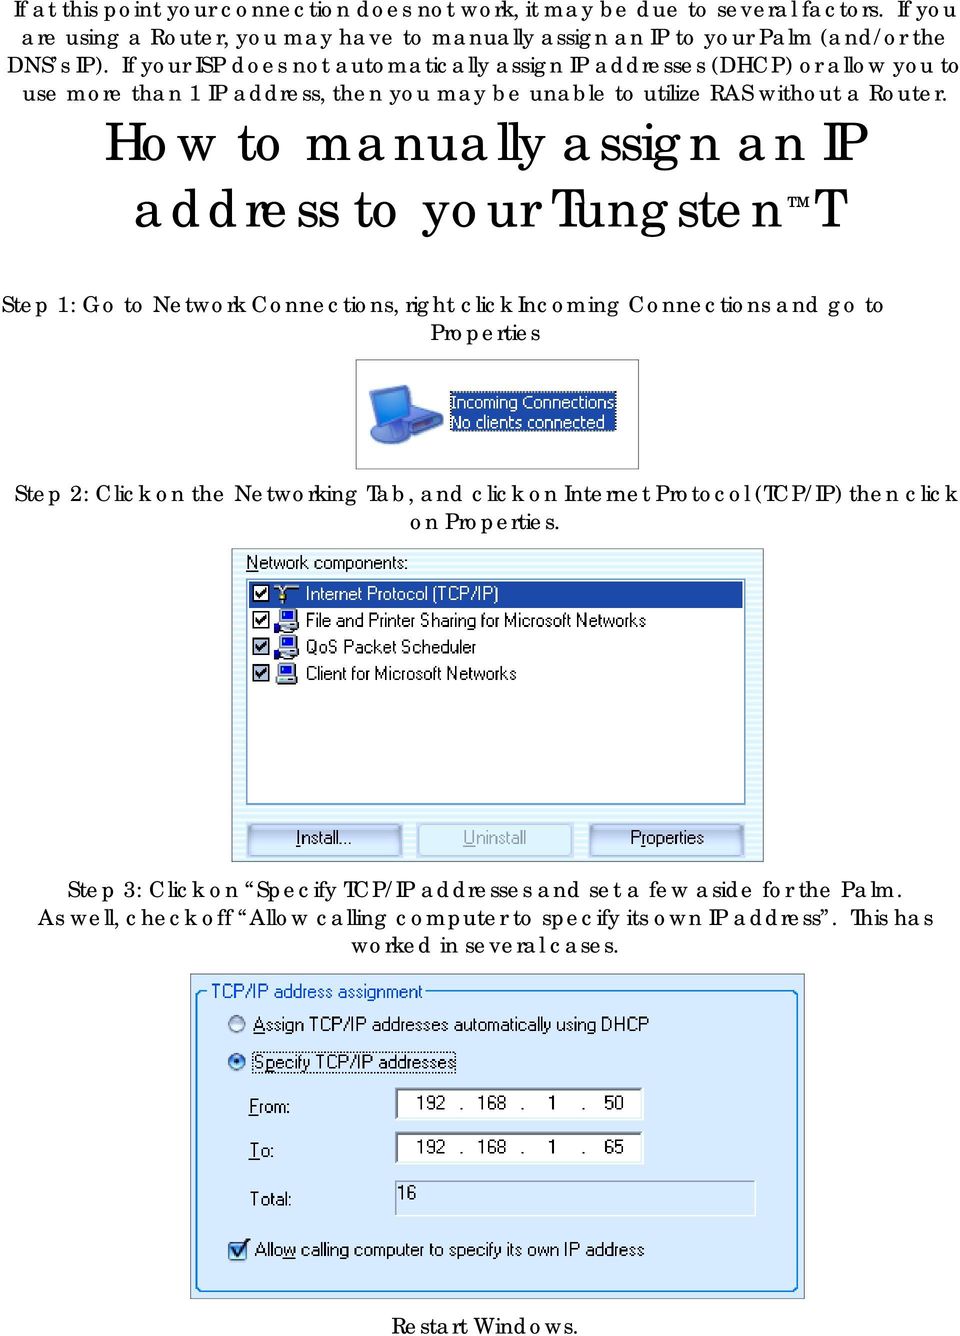 How to manually assign an IP address to your Tungsten T Step 1: Go to Network Connections, right click Incoming Connections and go to Properties Step 2: Click on the Networking Tab, and click on